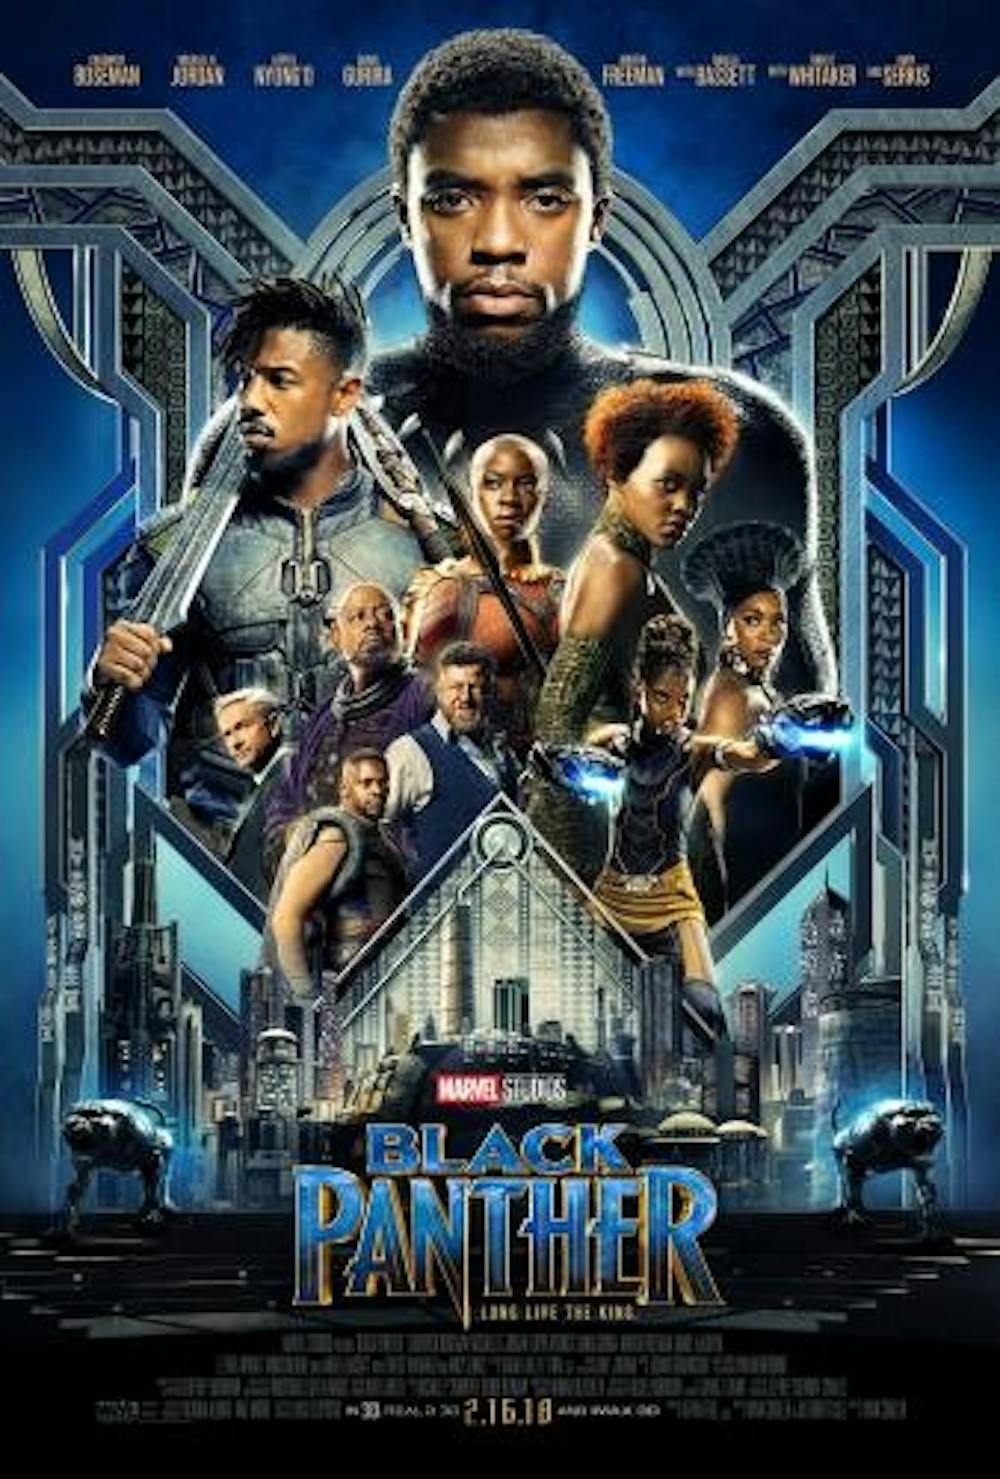 “Black Panther” is a watershed moment in pop culture